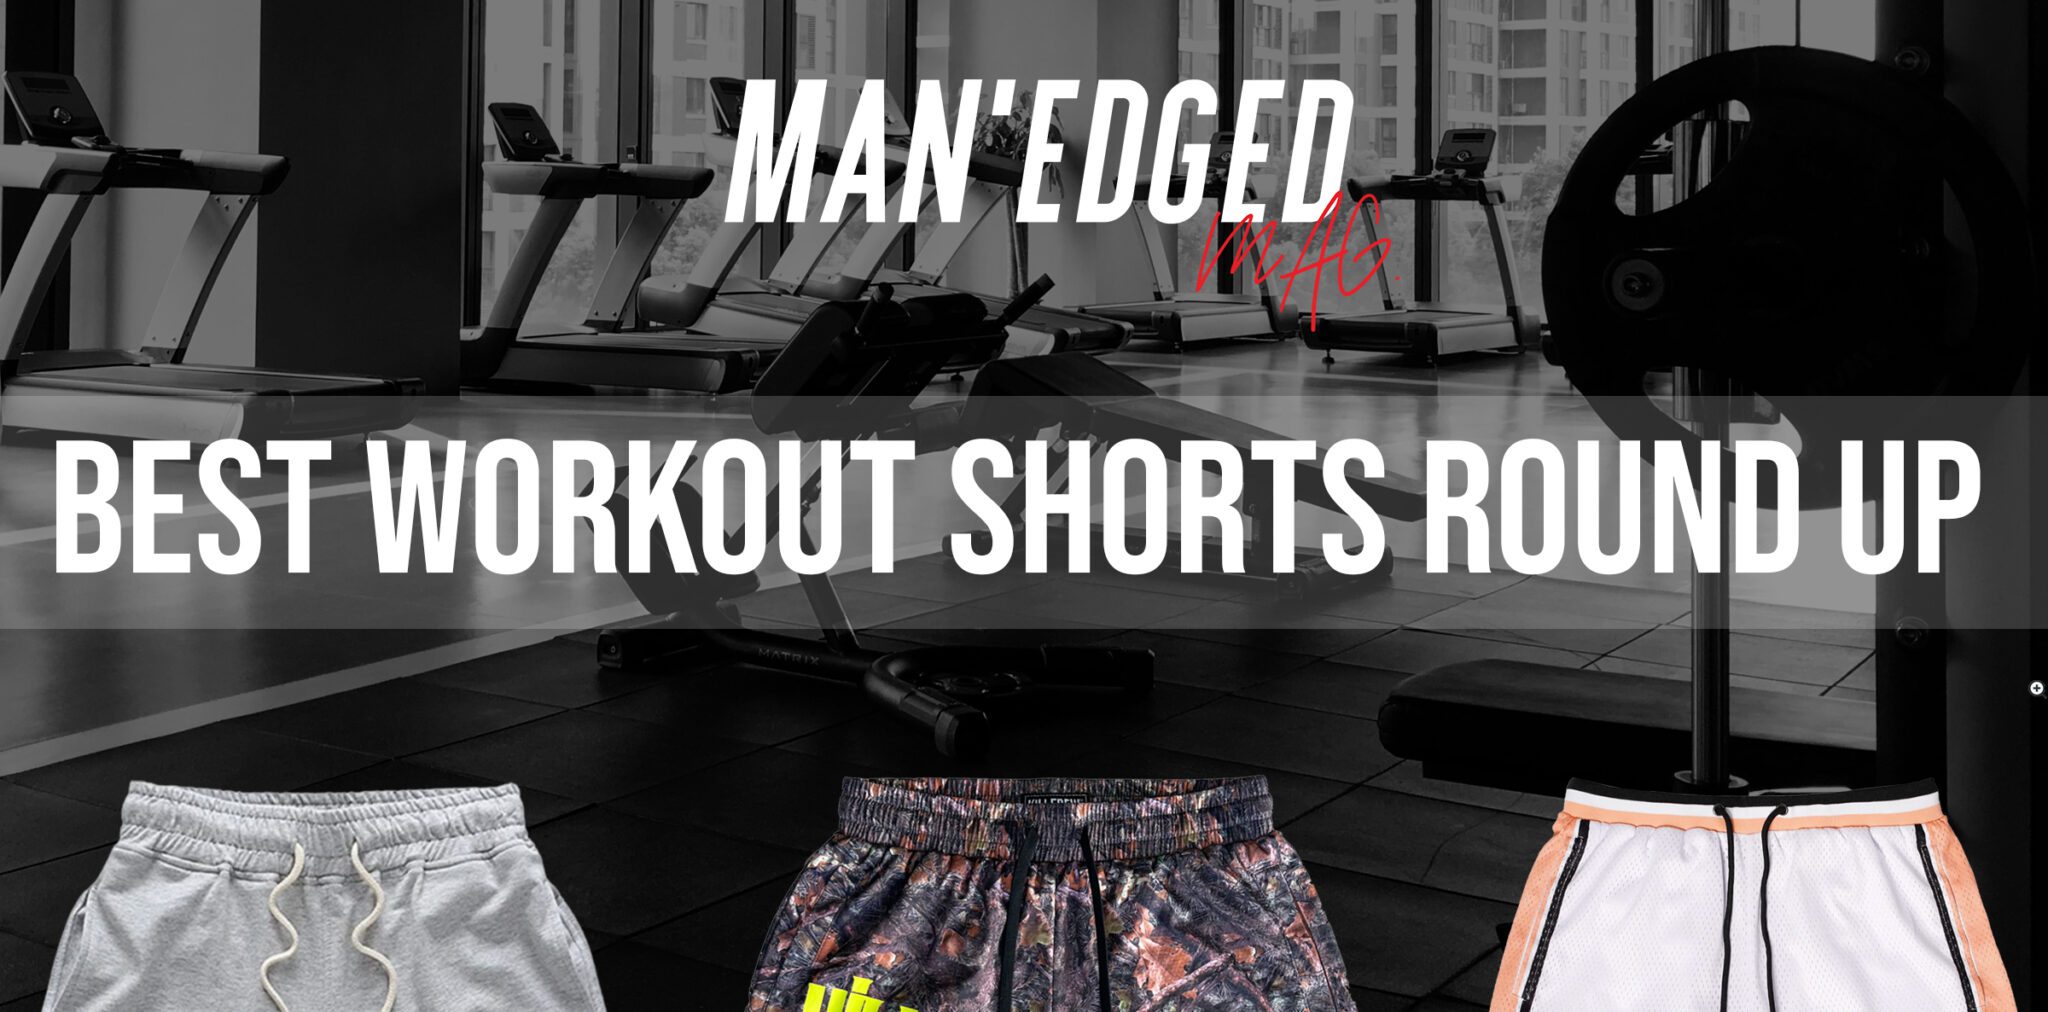 best workout shorts banner image featuring several men's workout shorts